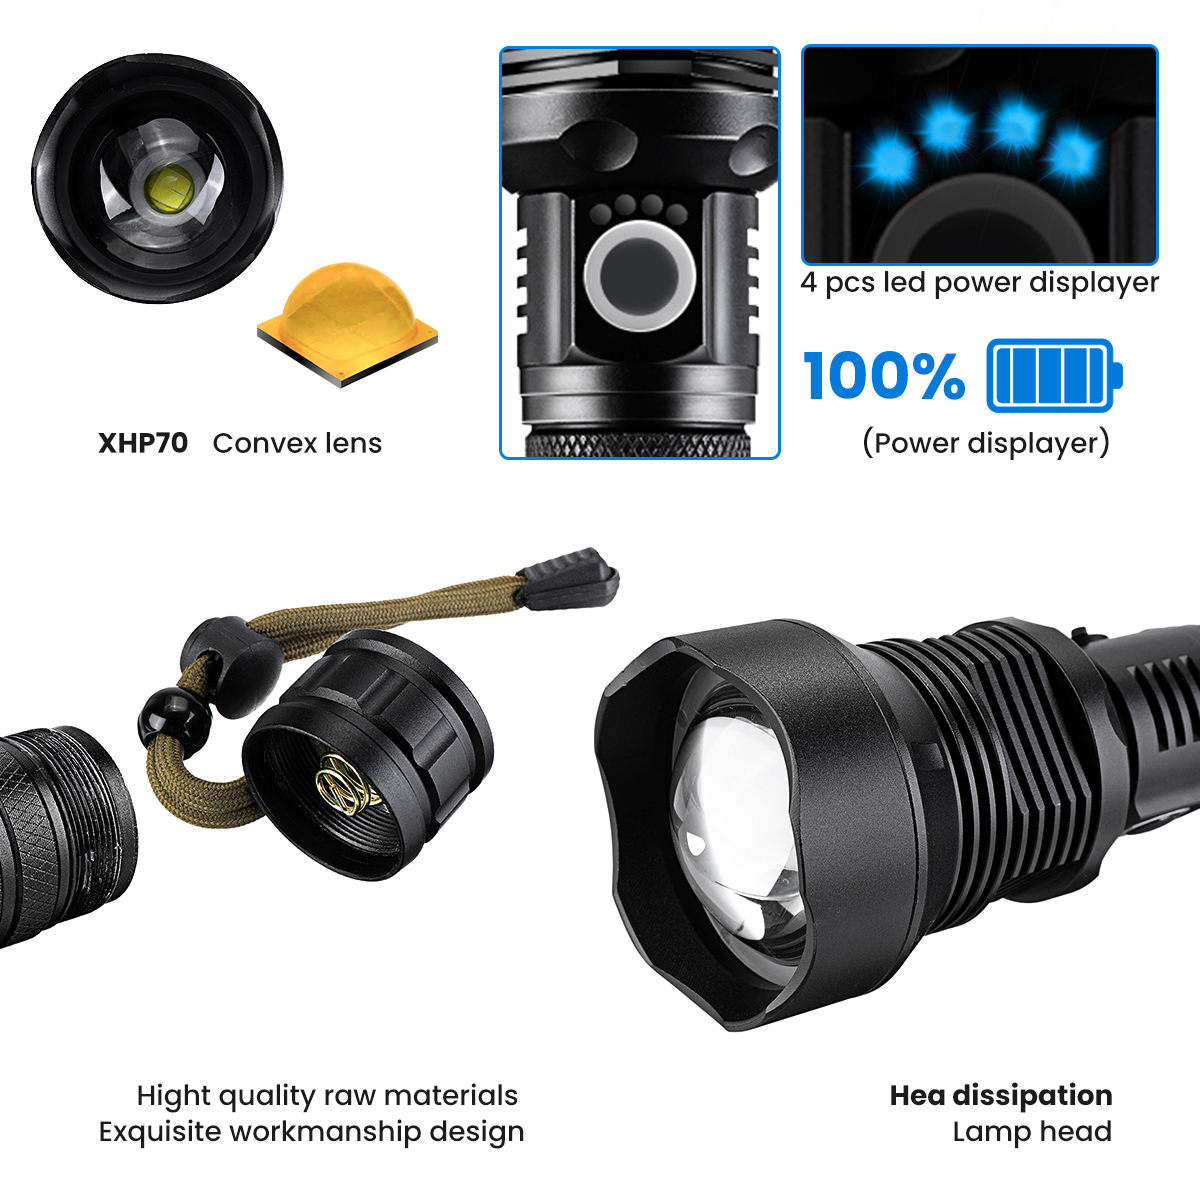 OUTERDO-XHP702-90000-Lumens-26650-Battery-LED-Flashlight-USB-Rechargeable-Outdoor-Waterproof-Tactica-1890704-4